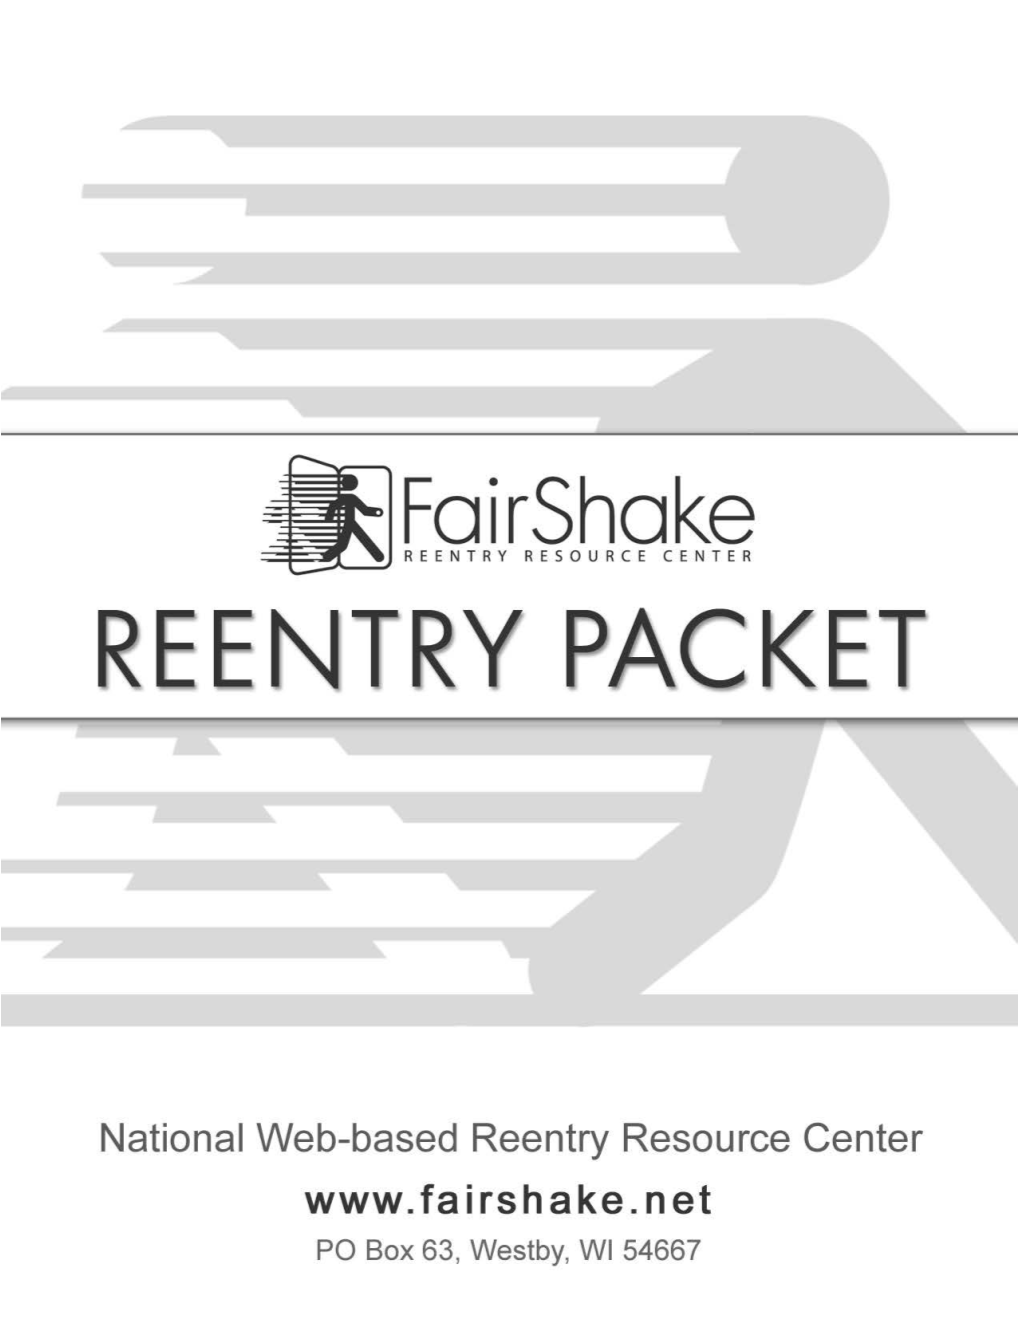 Who Are Reentry Stakeholders?